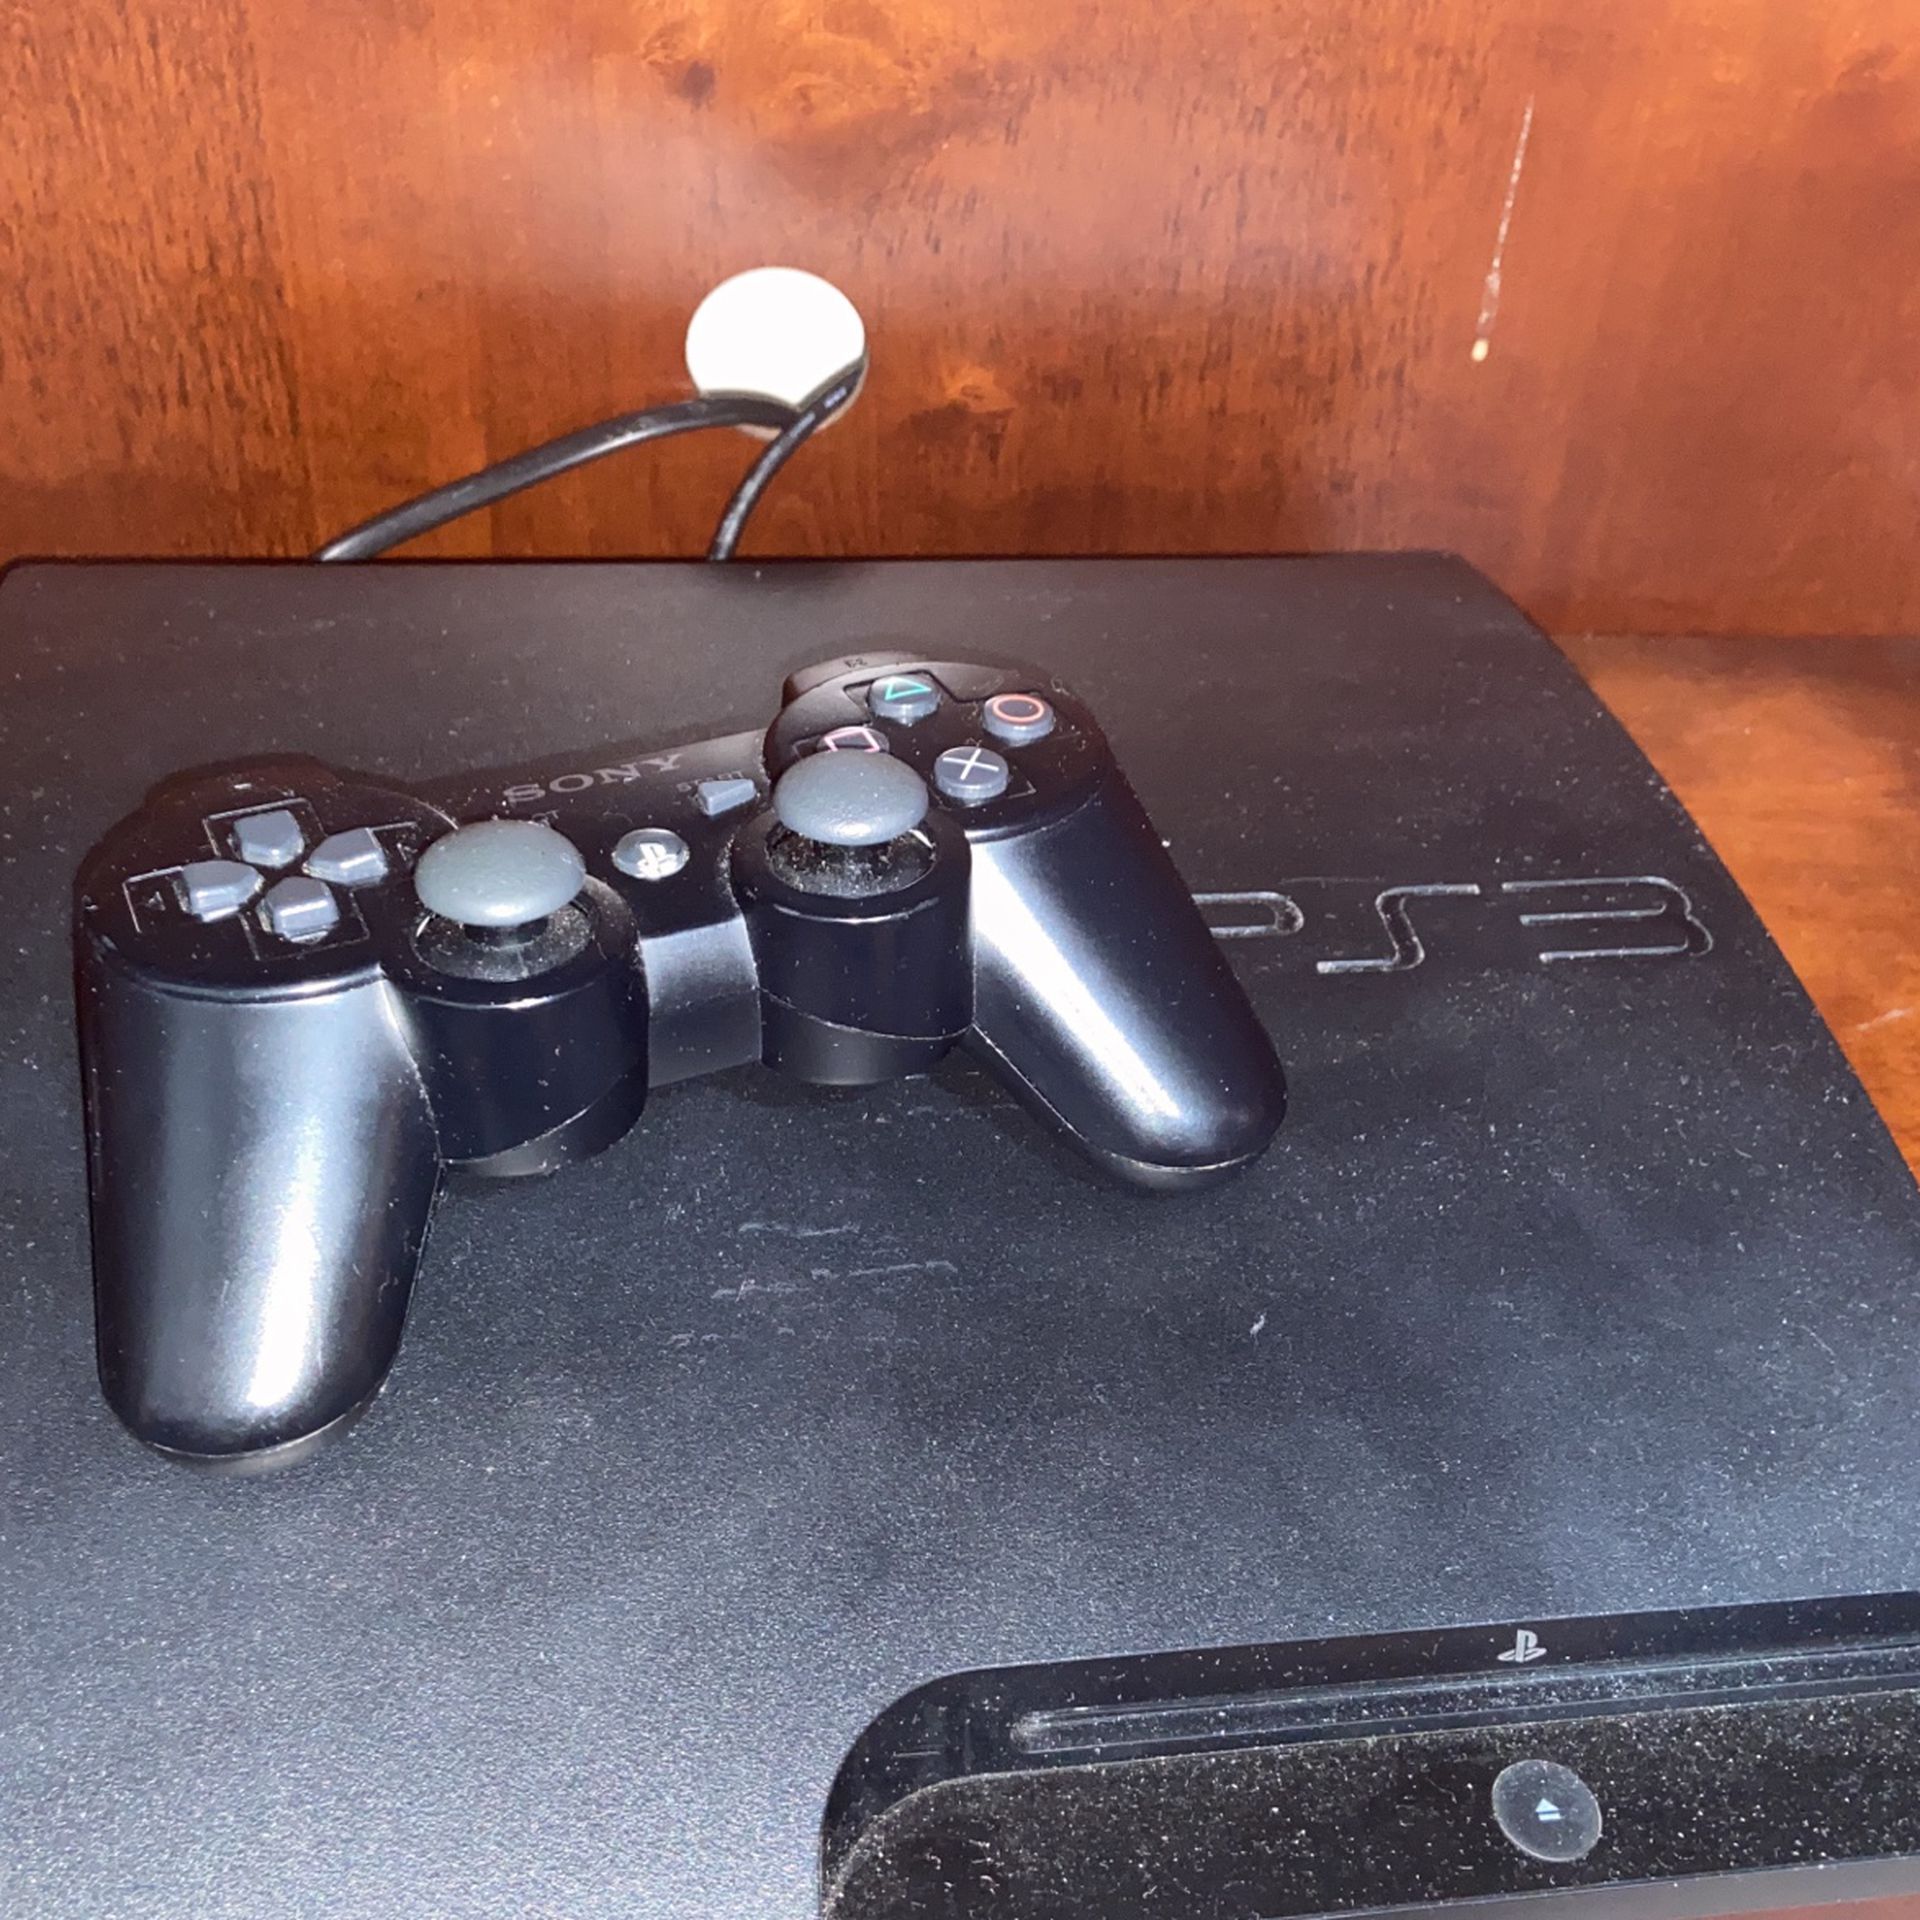 PlayStation 3 Slim Console W/ Controller and Charger